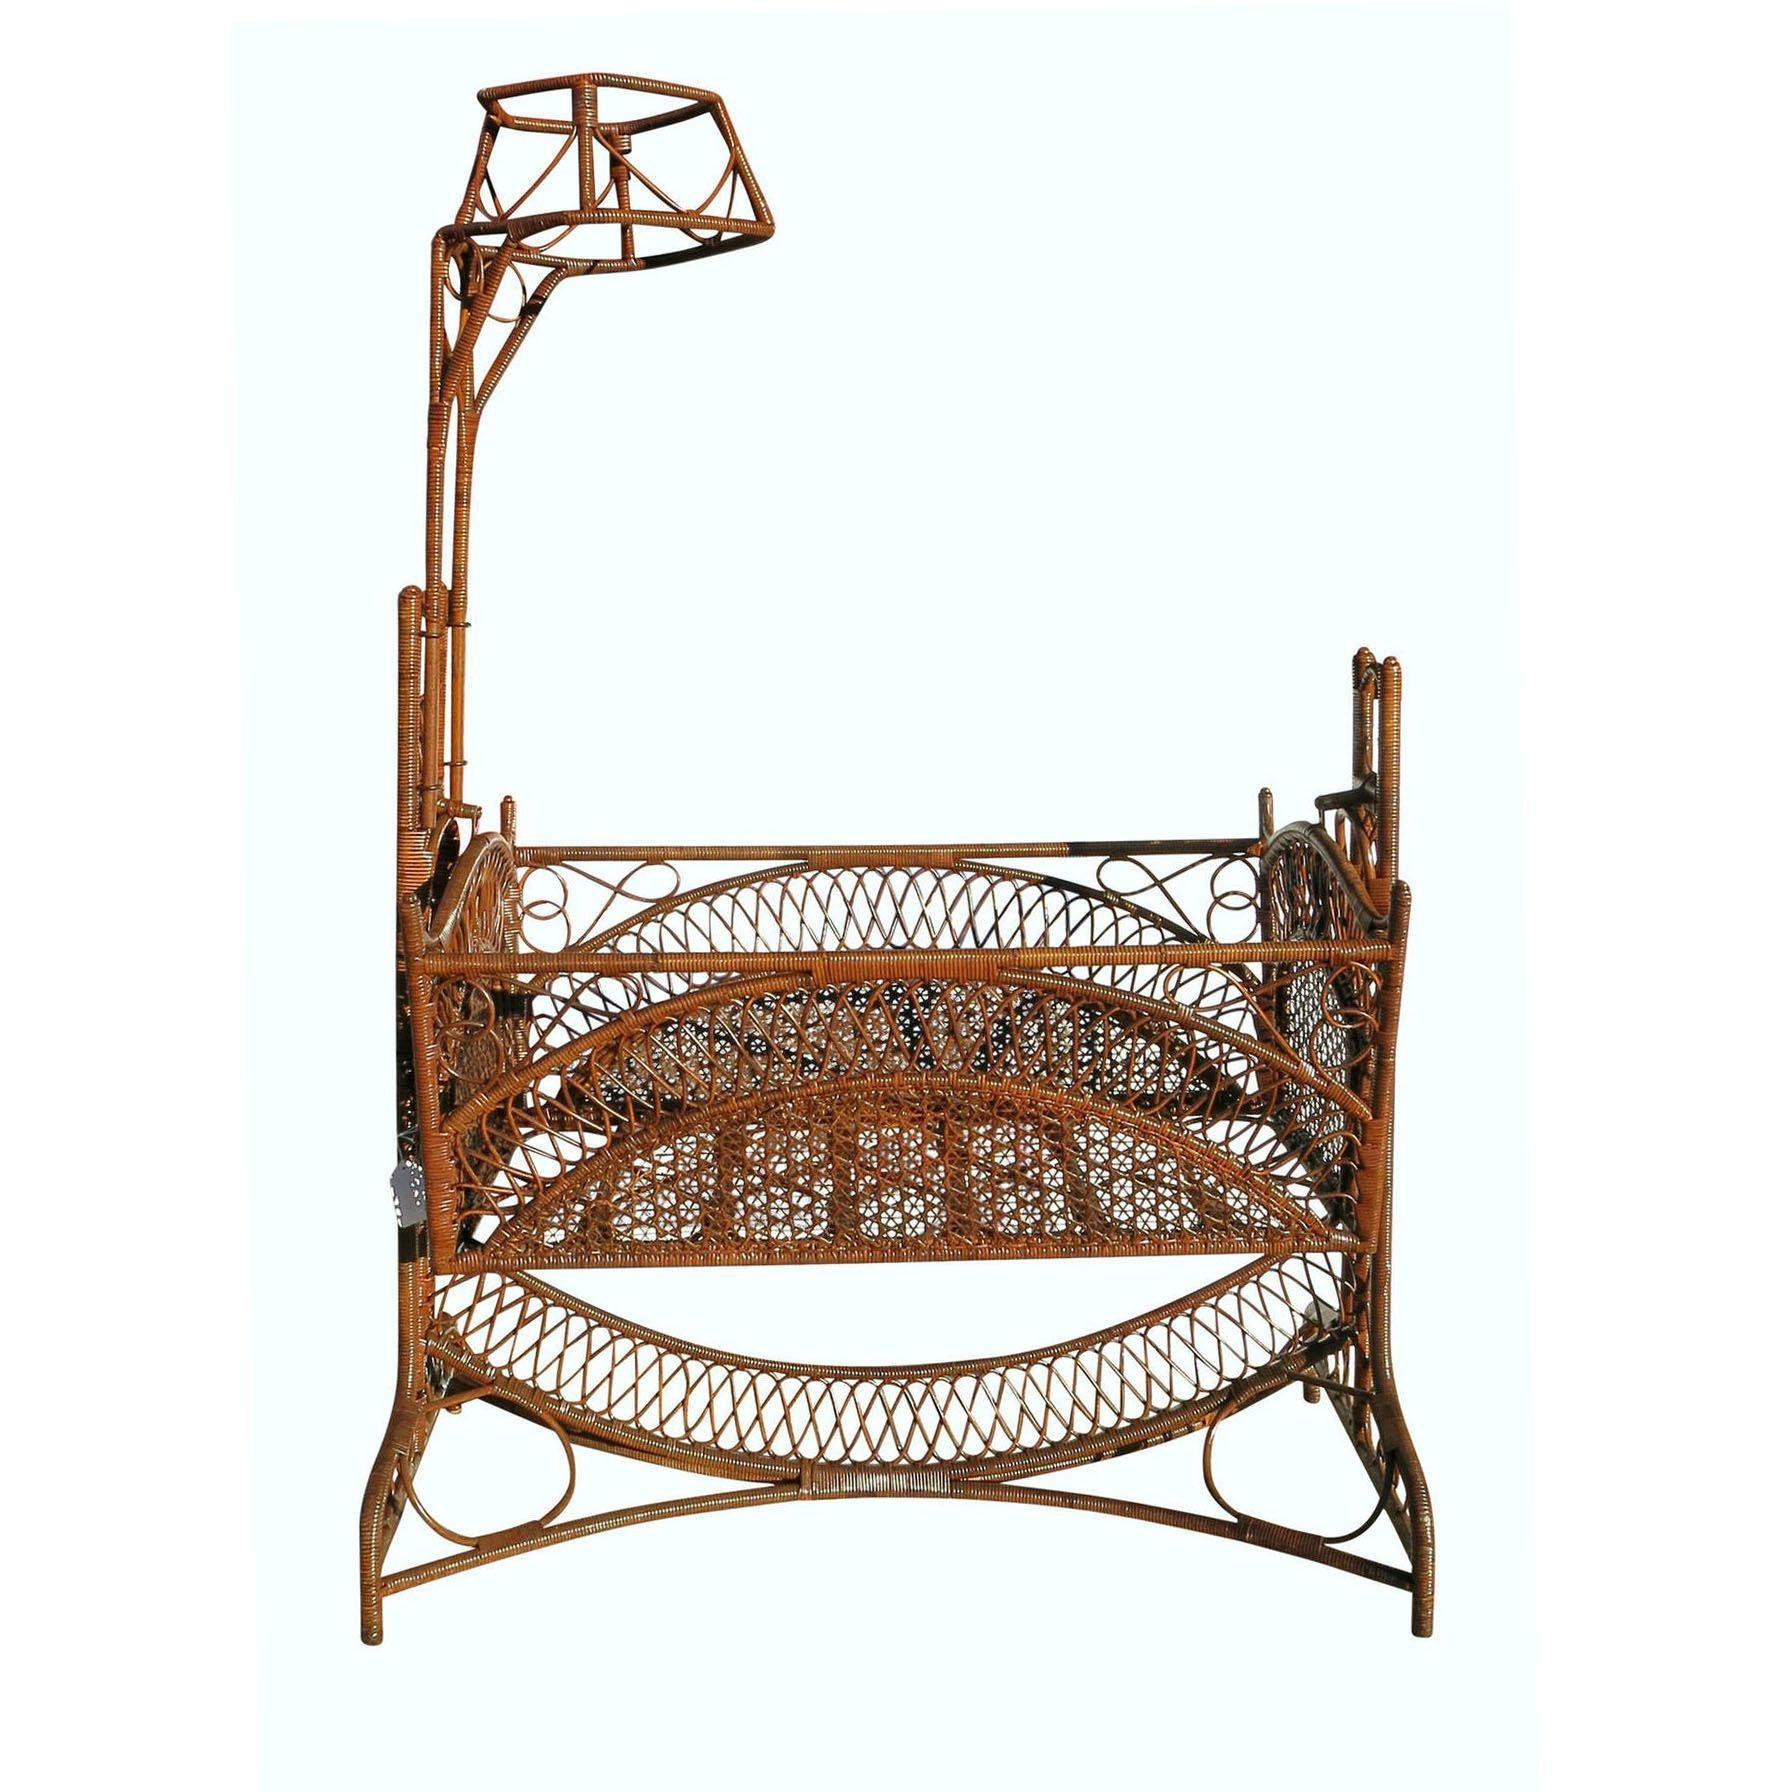 This dark-stained Victorian wicker, rattan, and bamboo cradle possess intricate patterns that give it an almost Gothic quality. An array of symmetrical reed arches and seamless striping crisscrossing designs are worked into the entire piece. The